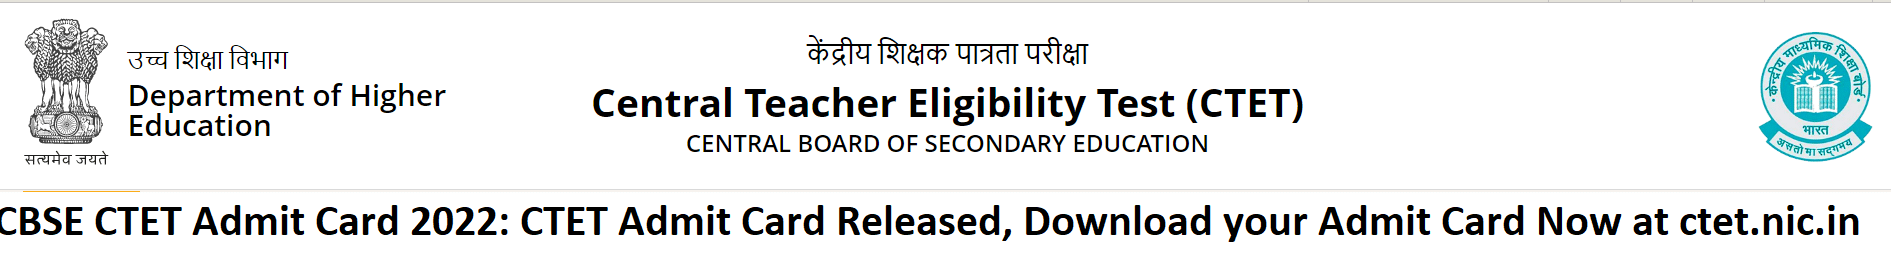 CTET B.Ed 2023: List of all the B.Ed Universities in Bihar with Seats and fees